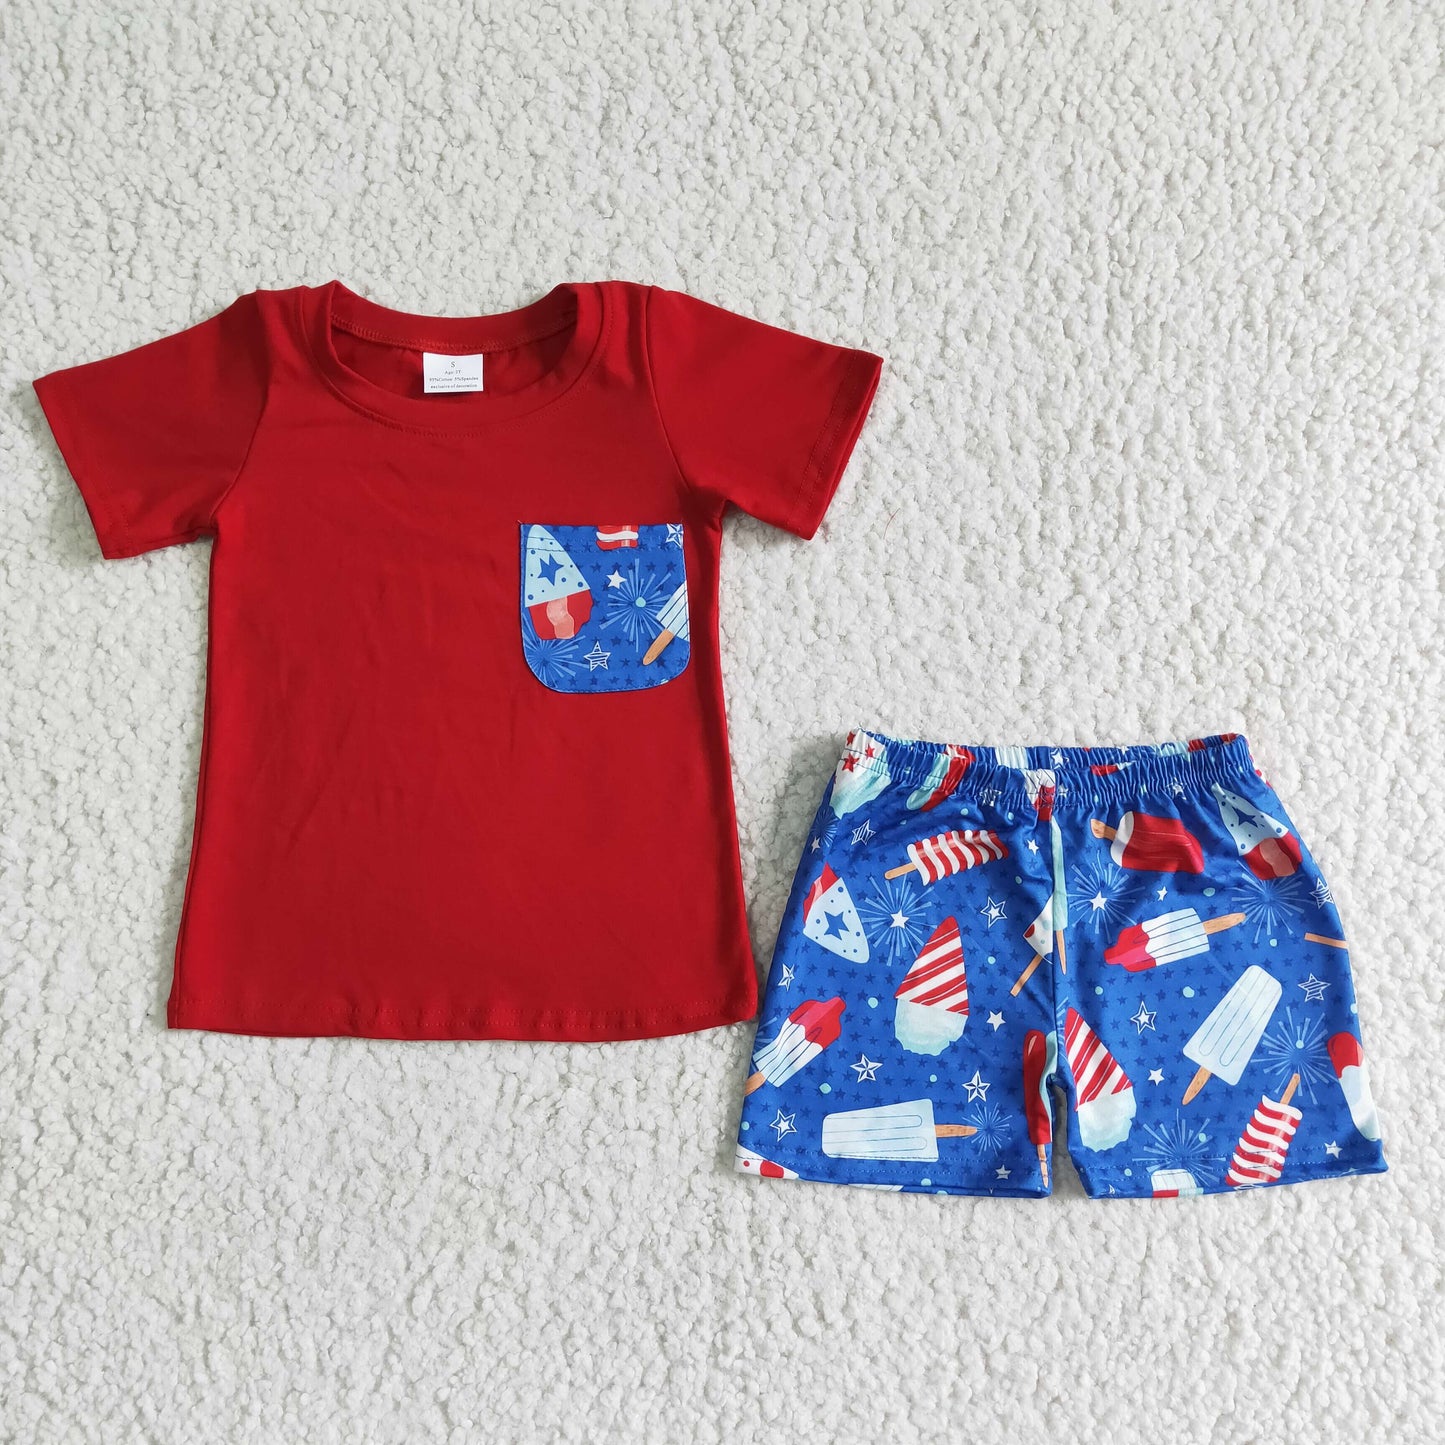 boy's red popsicle july 4th outfit shorts set clothing